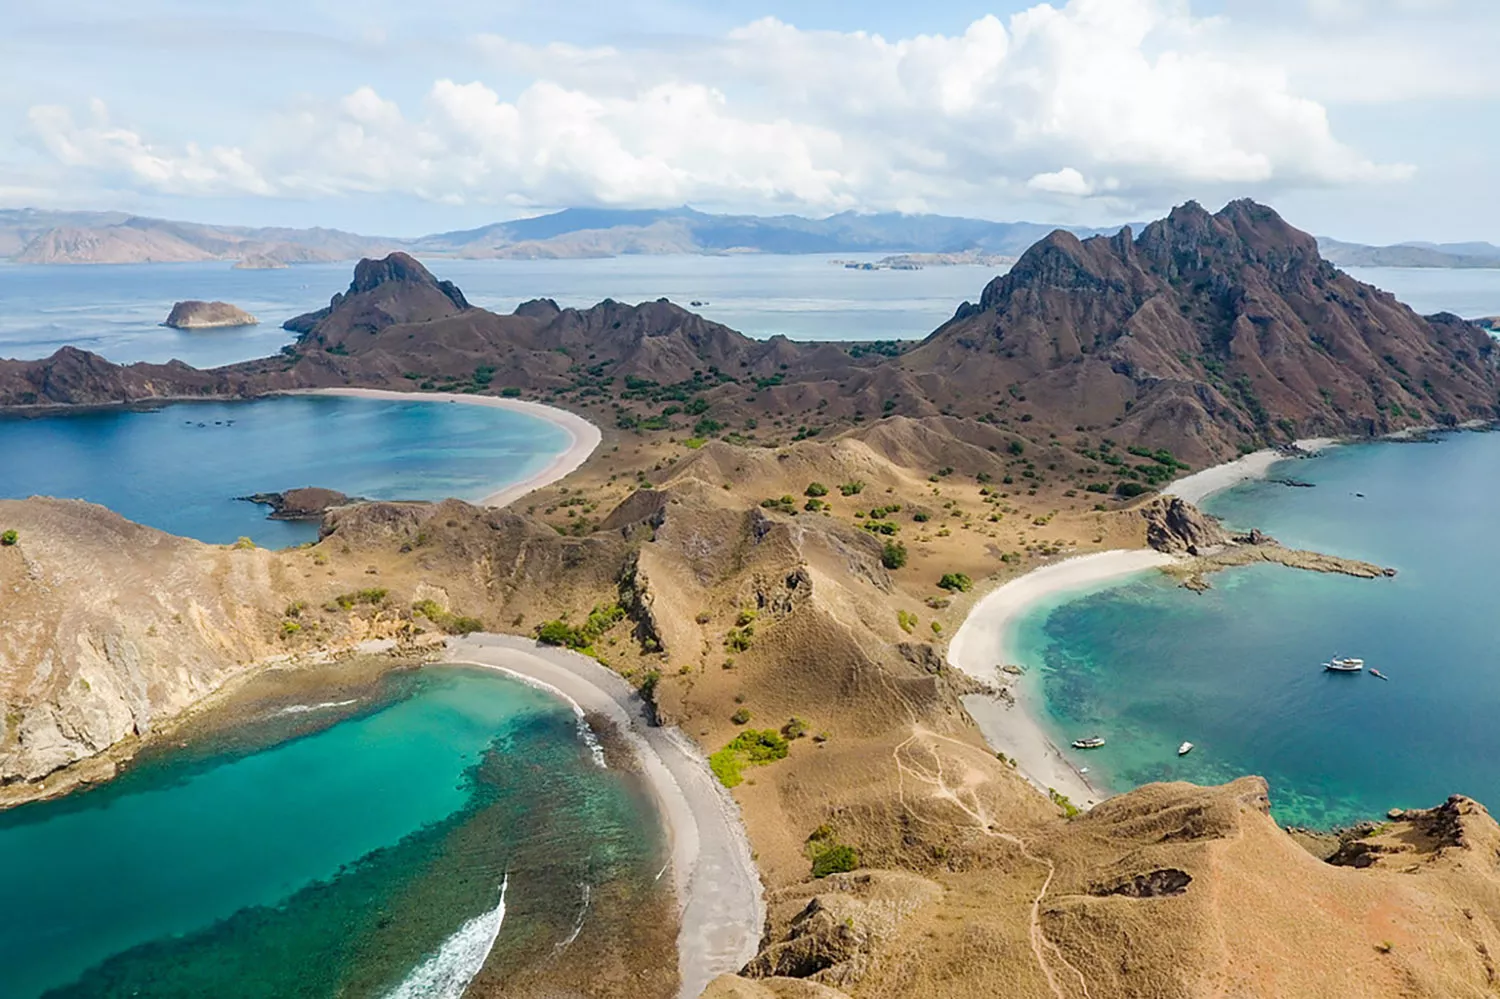 Padar Island in Indonesia, Central Asia | Trekking & Hiking - Rated 4.1